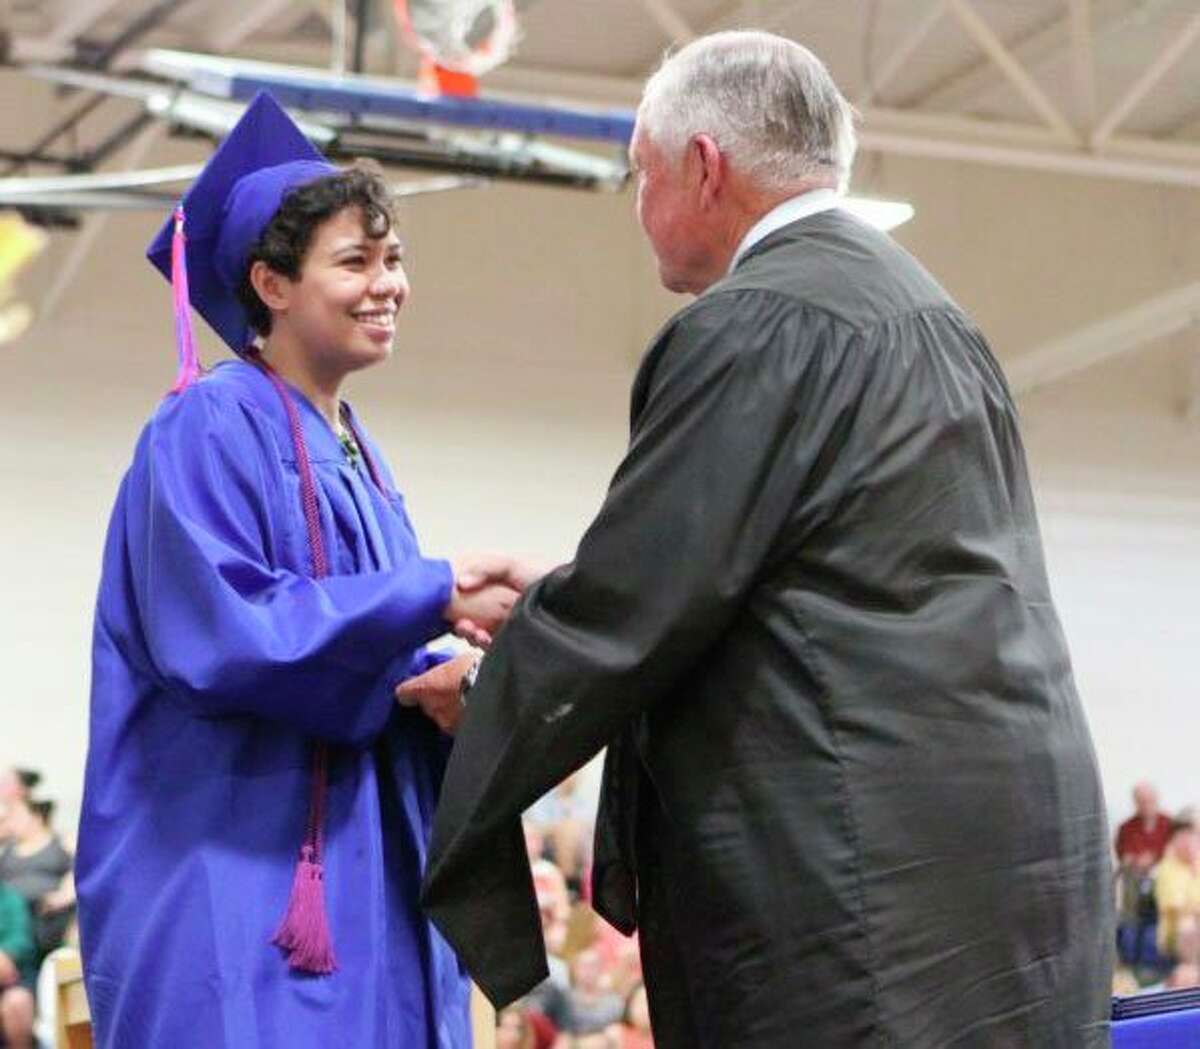 Chippewa Hills will be rescheduling their graduation in order to have an in-person ceremony. New graduation dates being proposed are set for June and July. (Pioneer file photo)